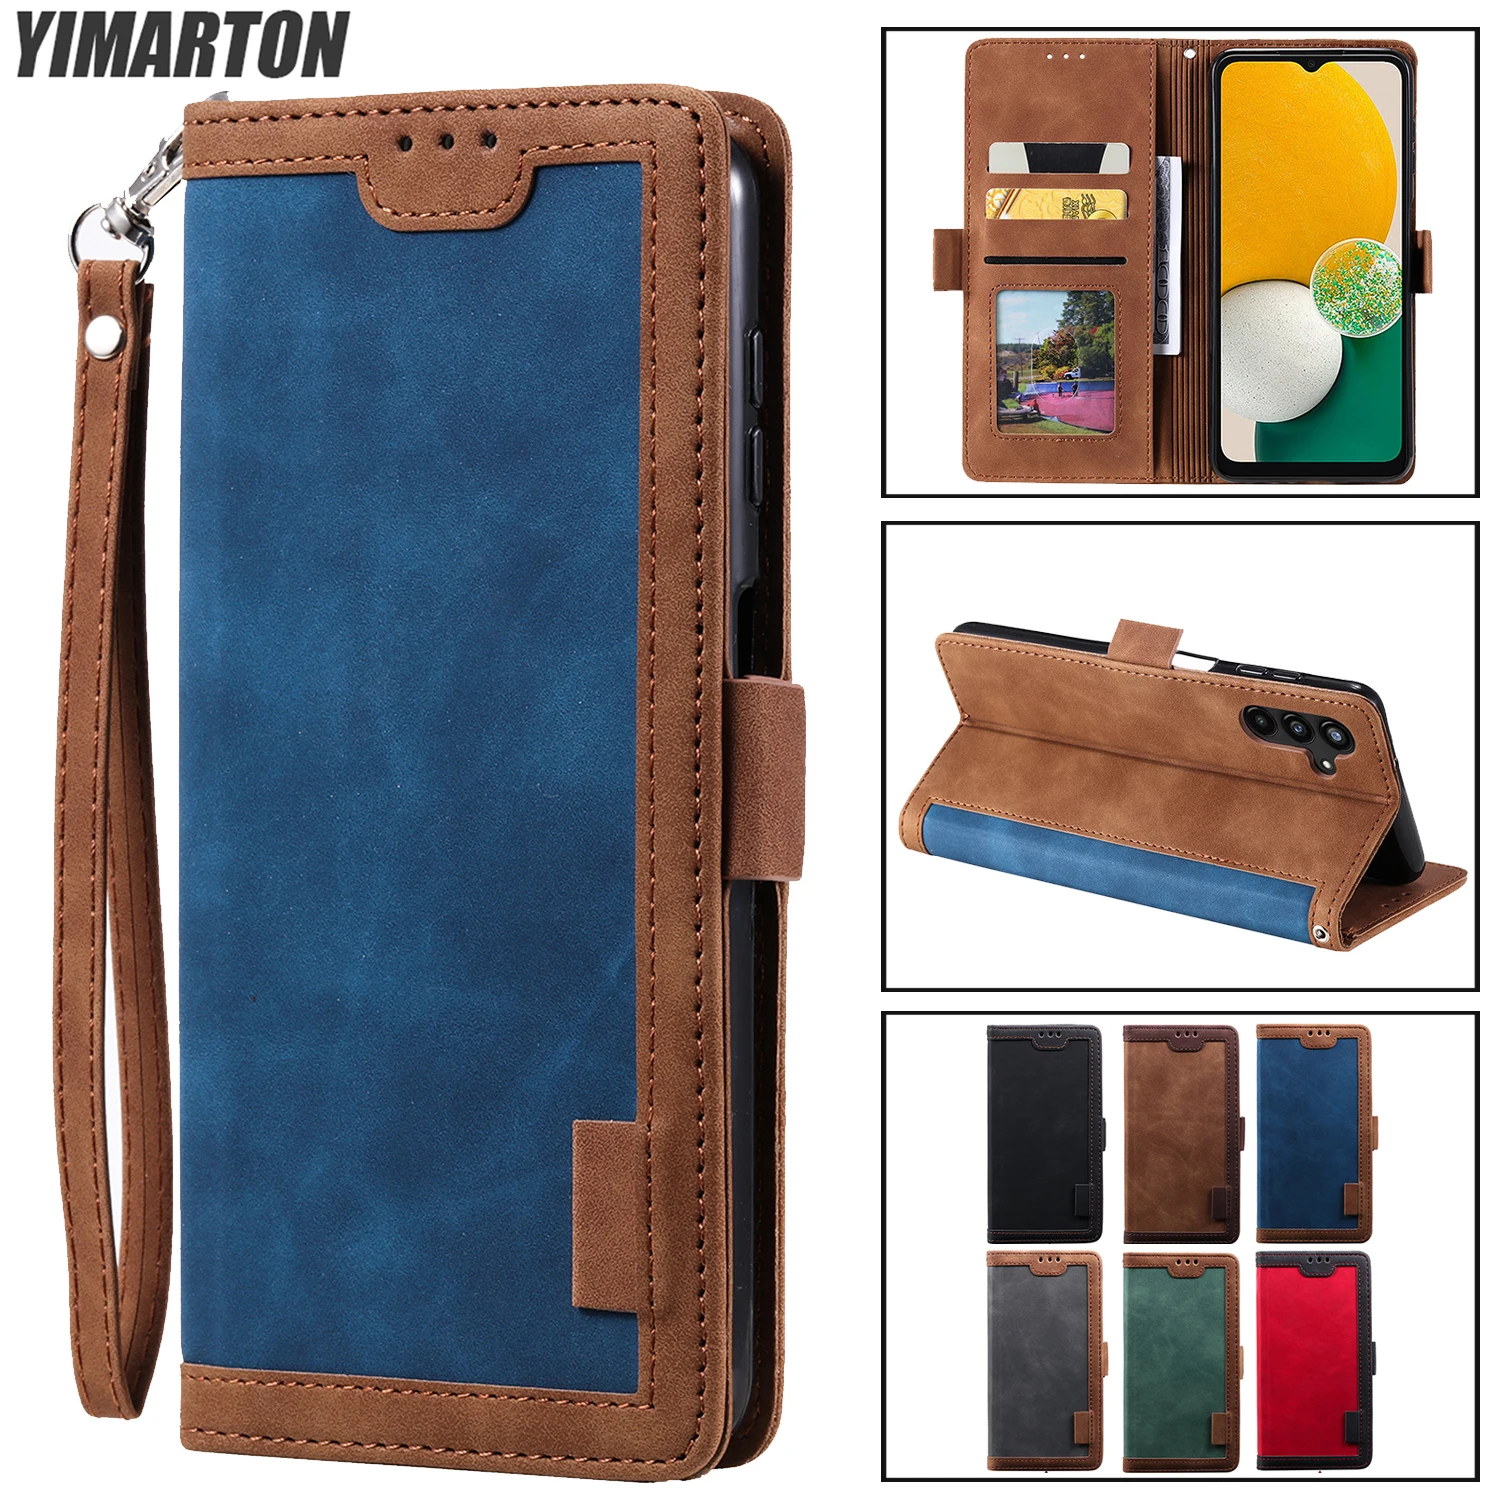 

Leather Flip Case For Samsung Galaxy A71 A51 A41 A31 A21 A70 A50 A30 S A40 A20 A10 Wallet Card Slots Magnetic Stand Phone Cover